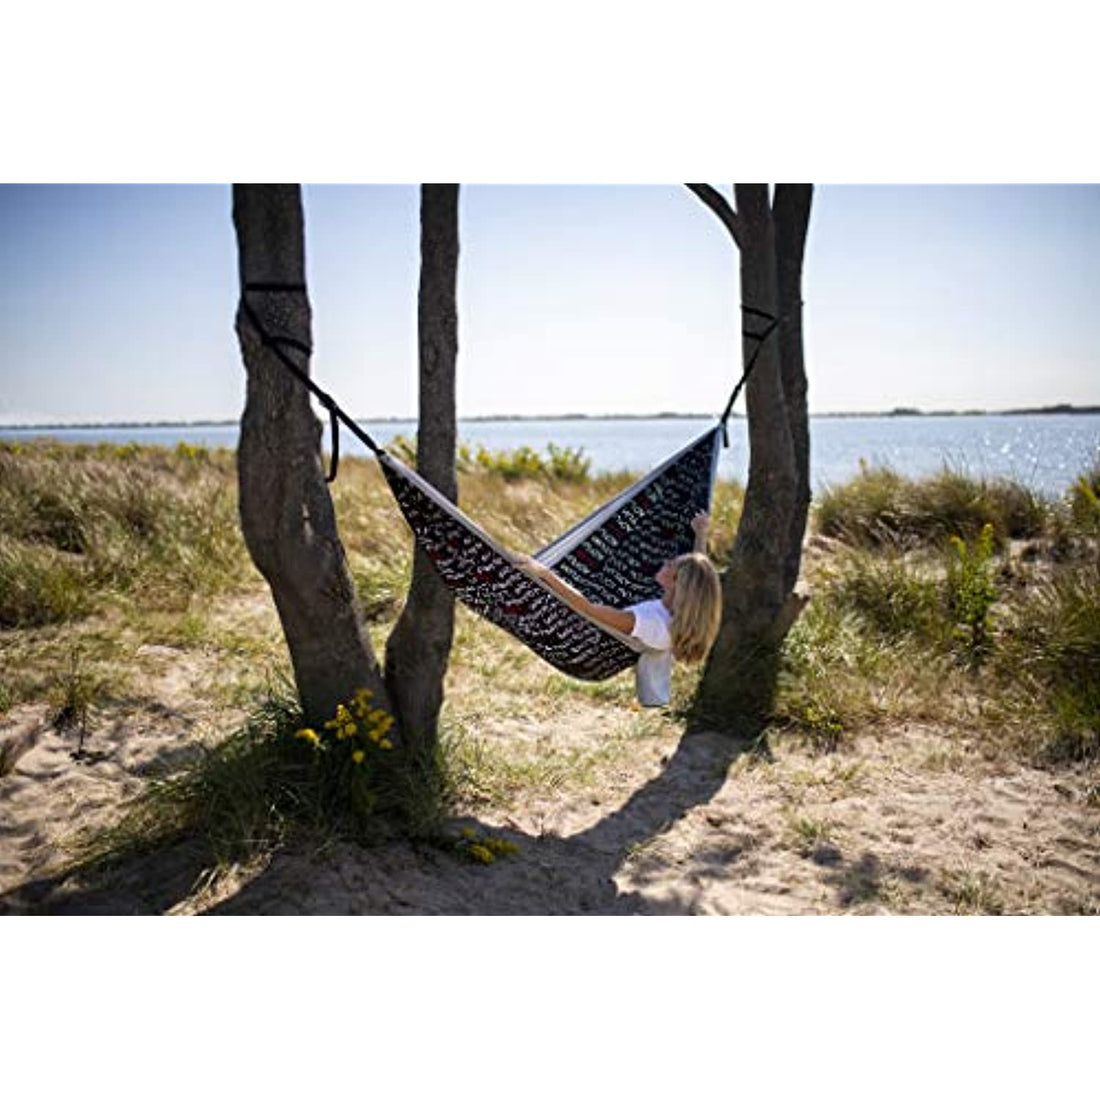 Nautica Portable Camping Hammock 1-2Person Kids or Adults with Straps, Caribiners & Bag for Travel/Backpacking/Hiking/Backyard/Lawn, Black Beauty/High Rise Grey, Large